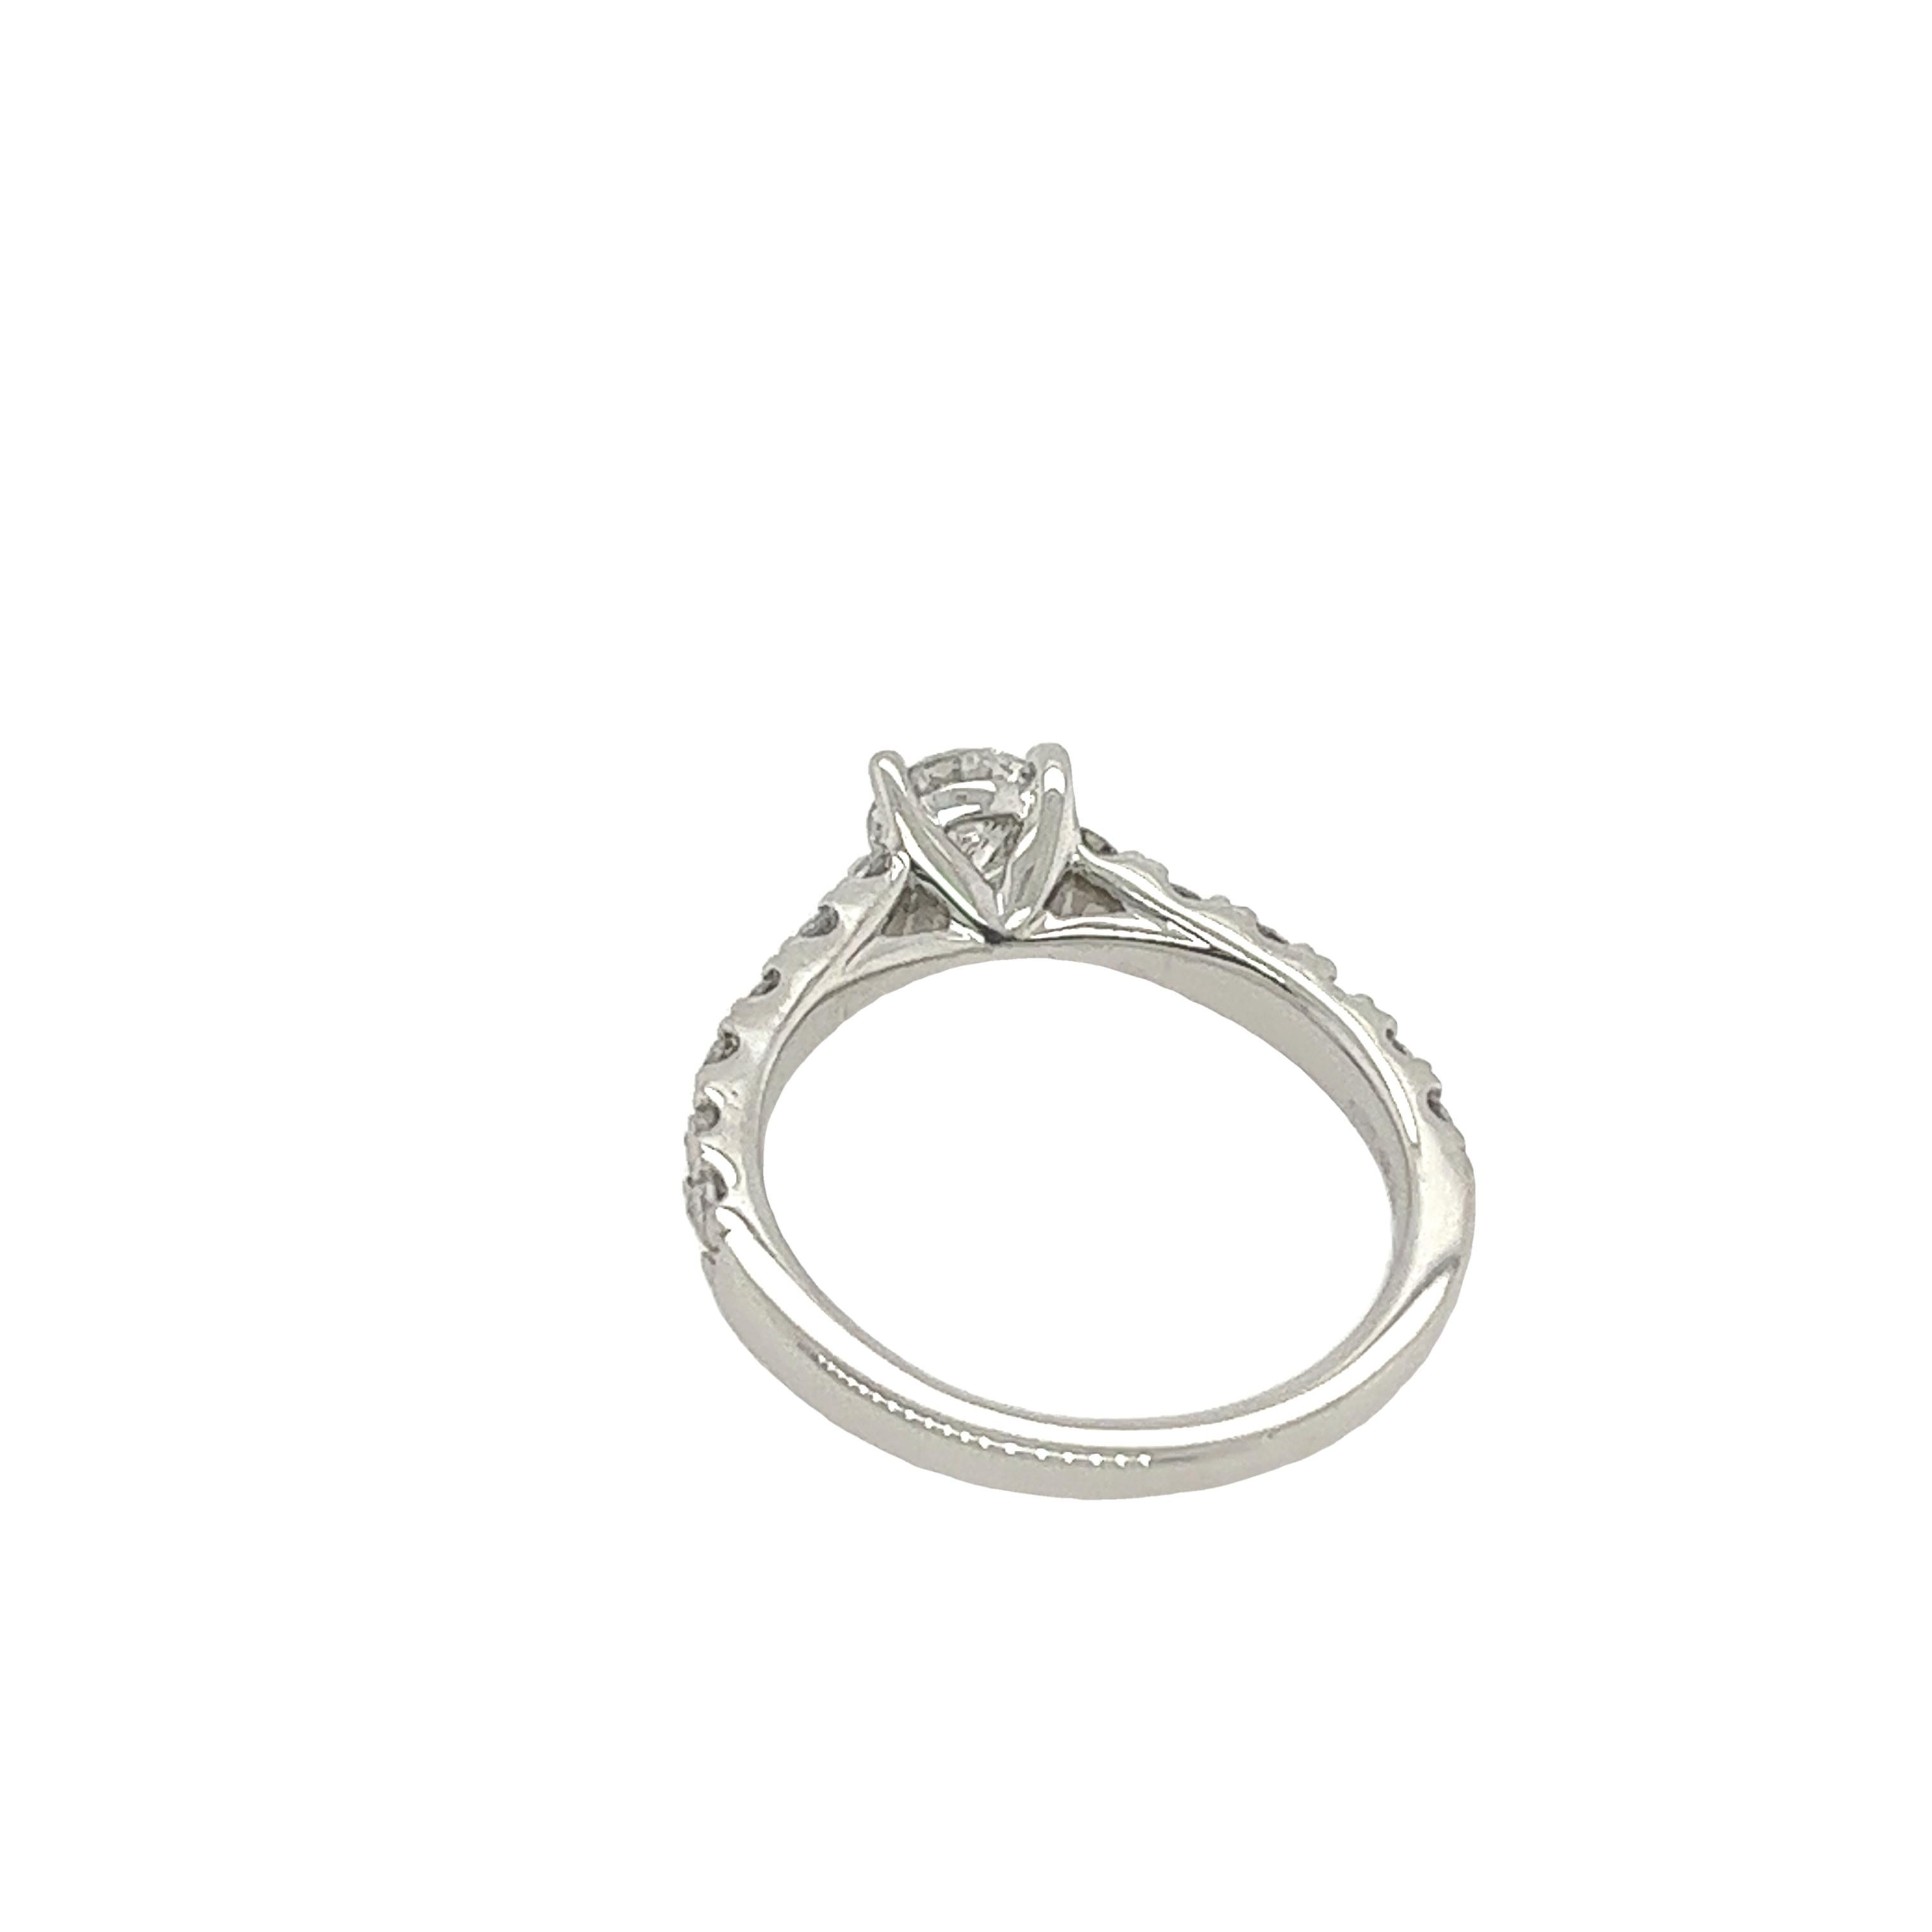 Women's or Men's Platinum Diamond Solitaire Ring Set With 0.40ct Round Diamond & 0.62ct On Sides For Sale